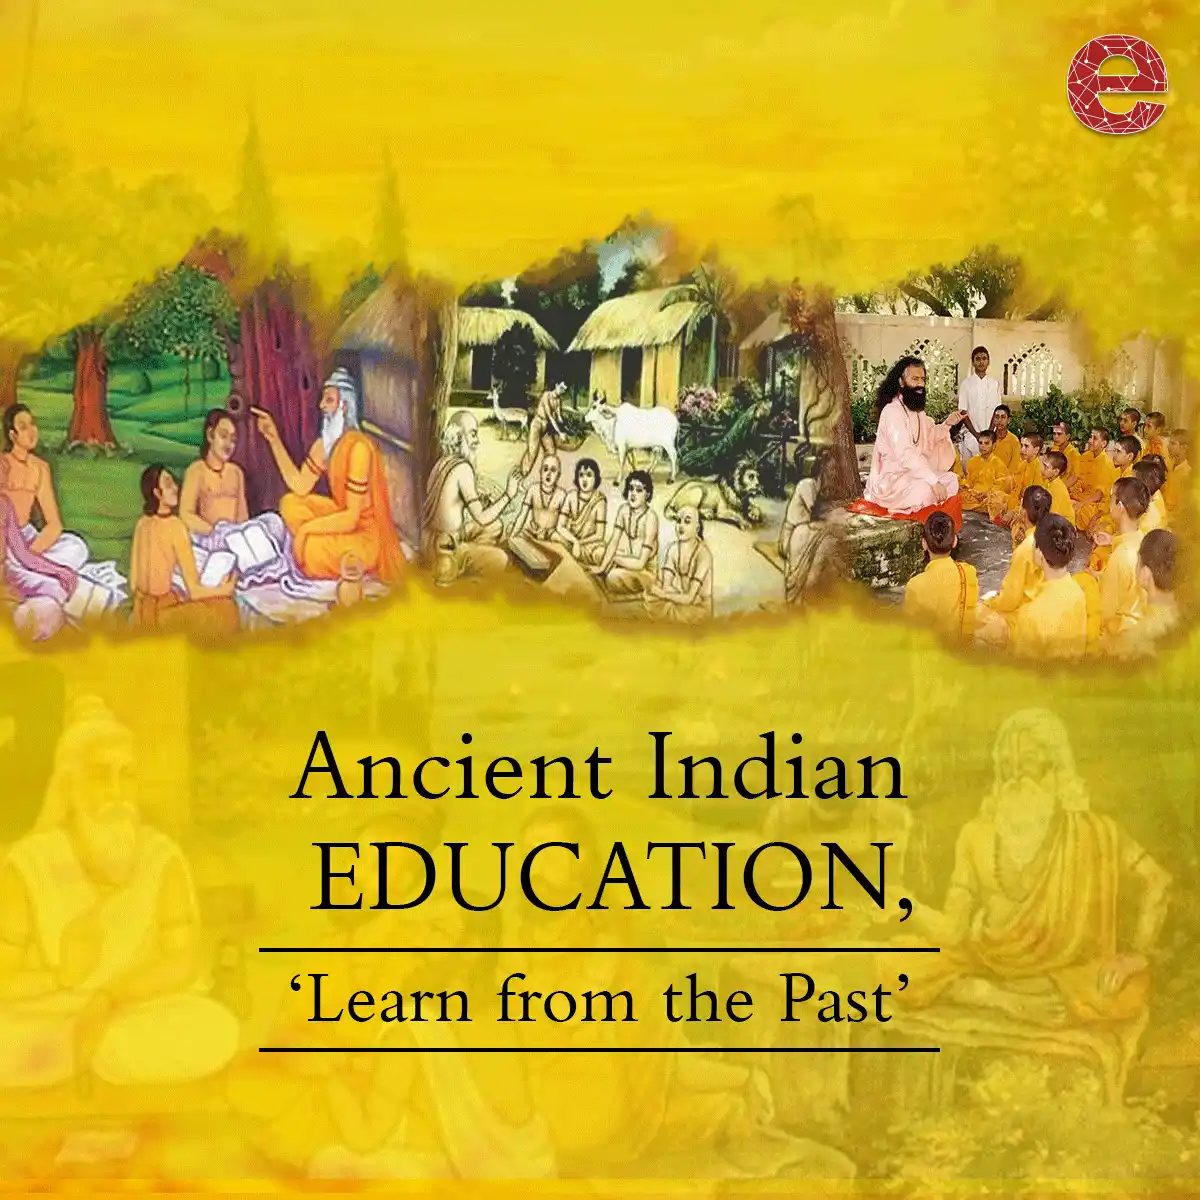 Ancient Indian Education: A Timeless Legacy